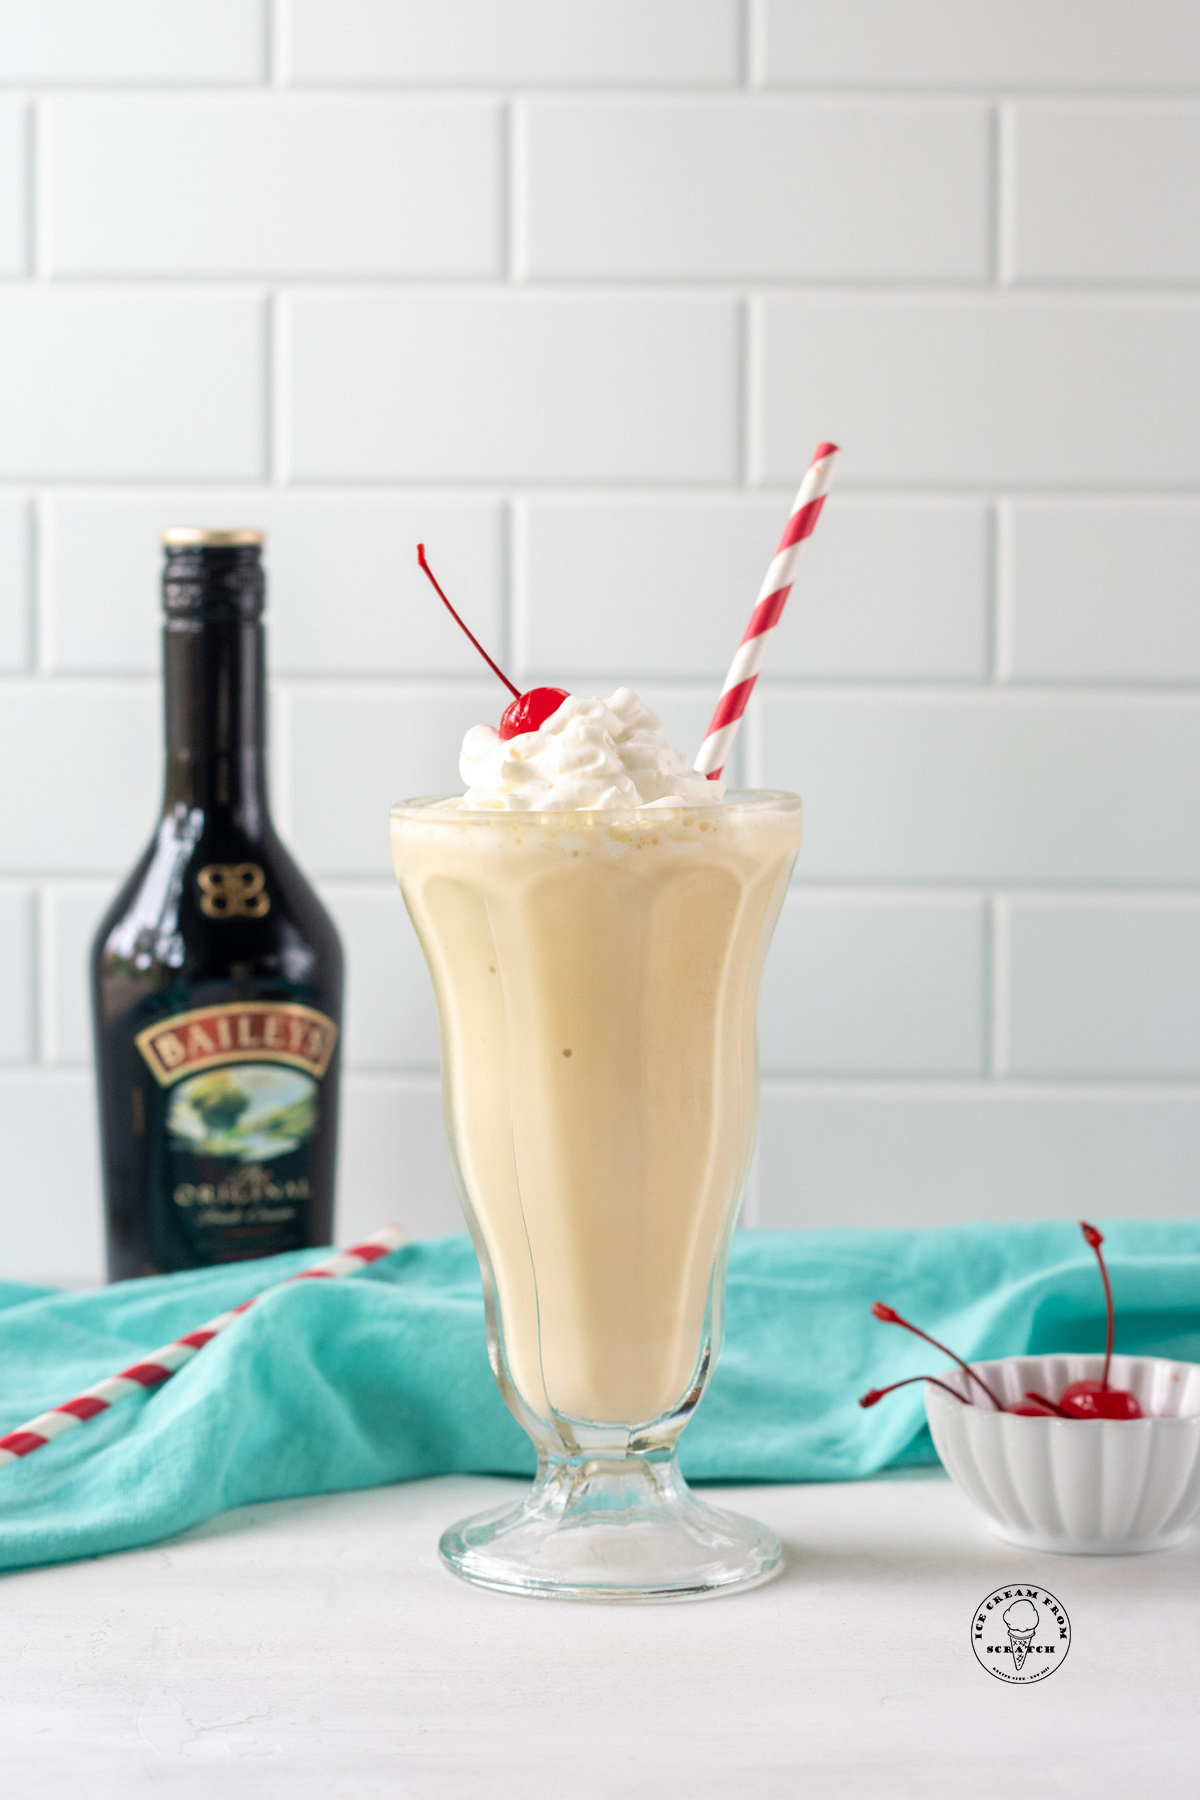 a milkshake in a footed glass with a red and white straw in it, next to a bottle of baileys Irish creme.